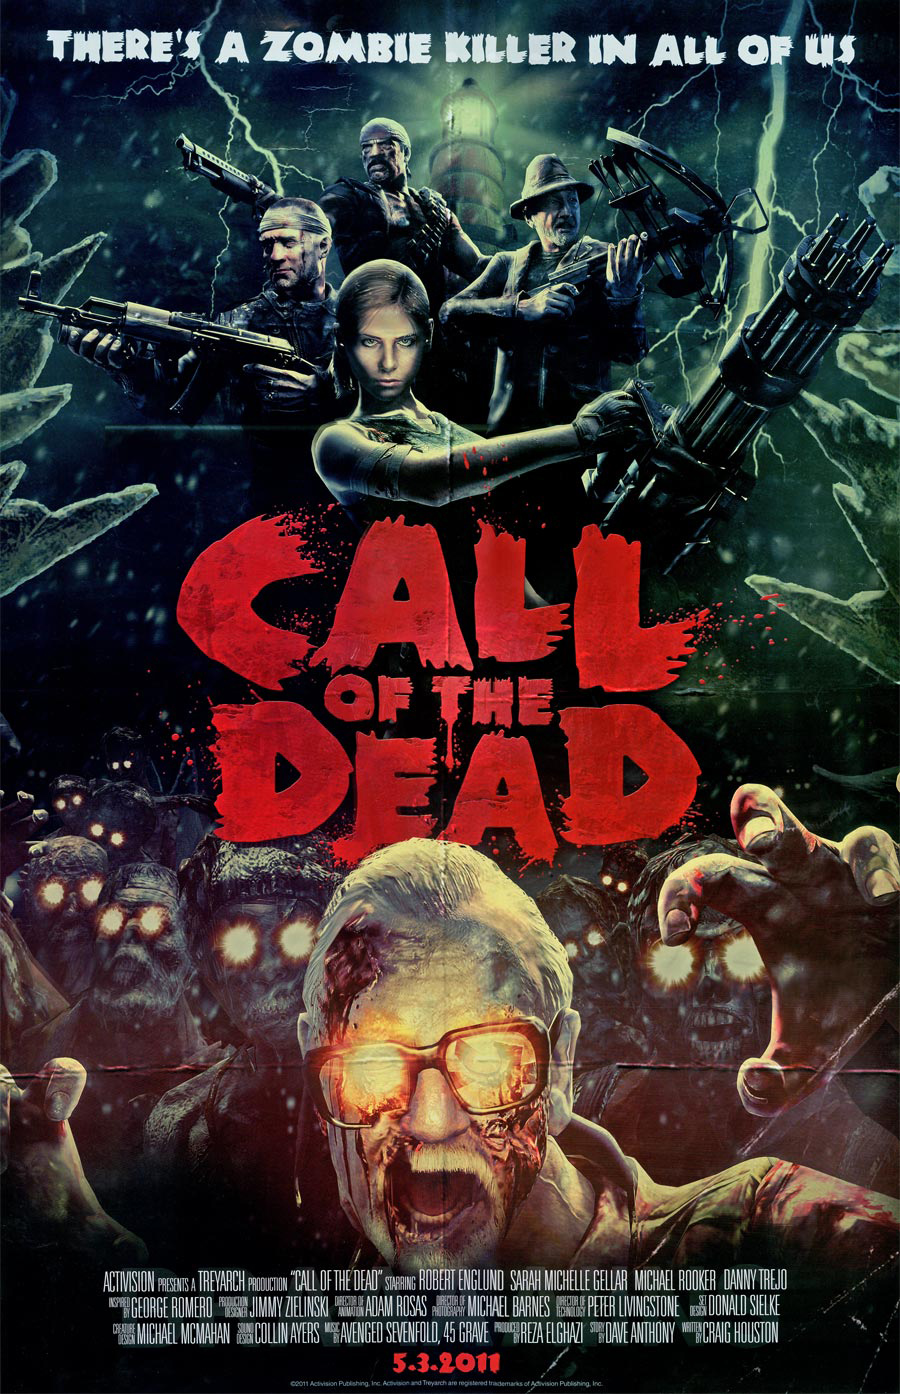 Call of the Dead